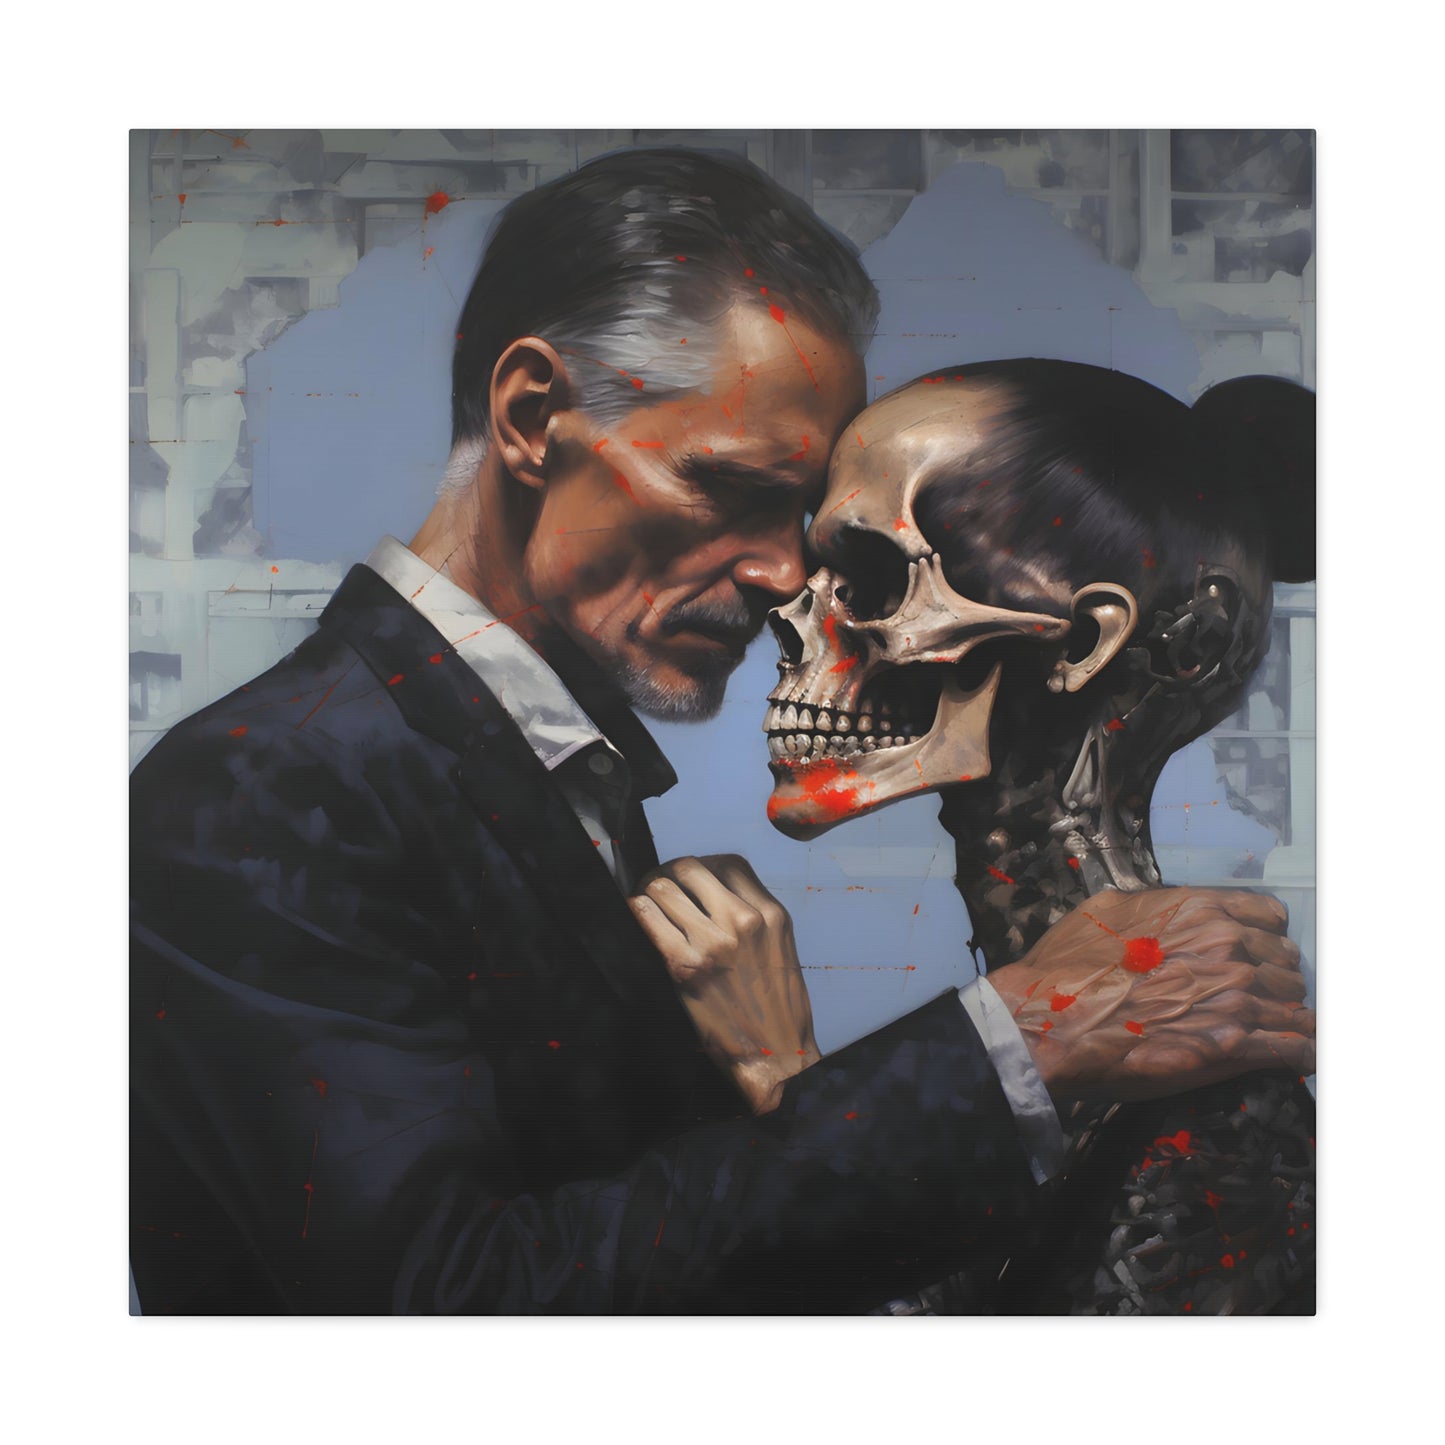 image 2 Embrace of Mortality', a hyperrealist painting depicting the haunting juxtaposition of love and death, offering a visceral reminder of human fragility, inspired by vanitas art traditions with a modern twist.